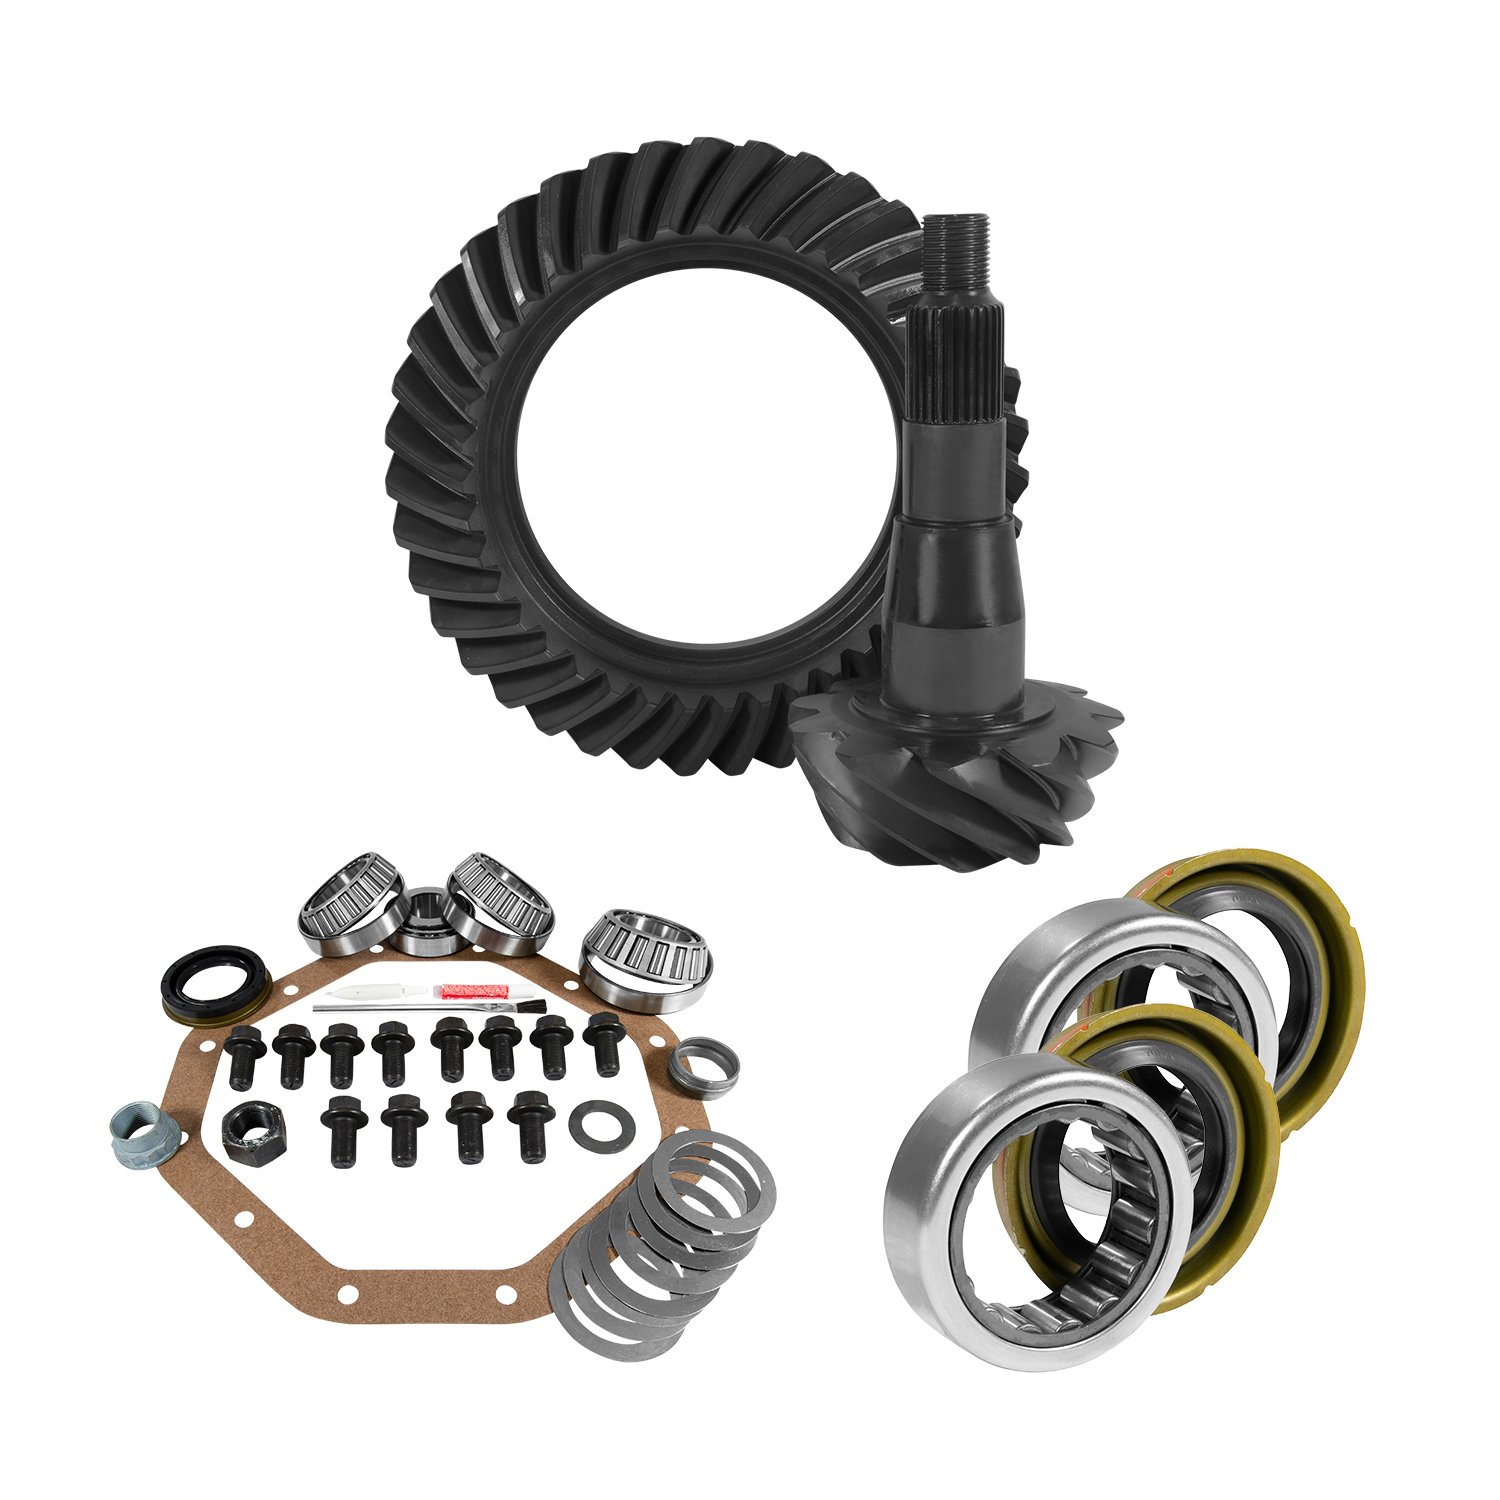 USA Standard 10793 Zf 9.25 in. Chy 3.21 Rear Ring & Pinion Install Kit, Axle Bearings & Seal